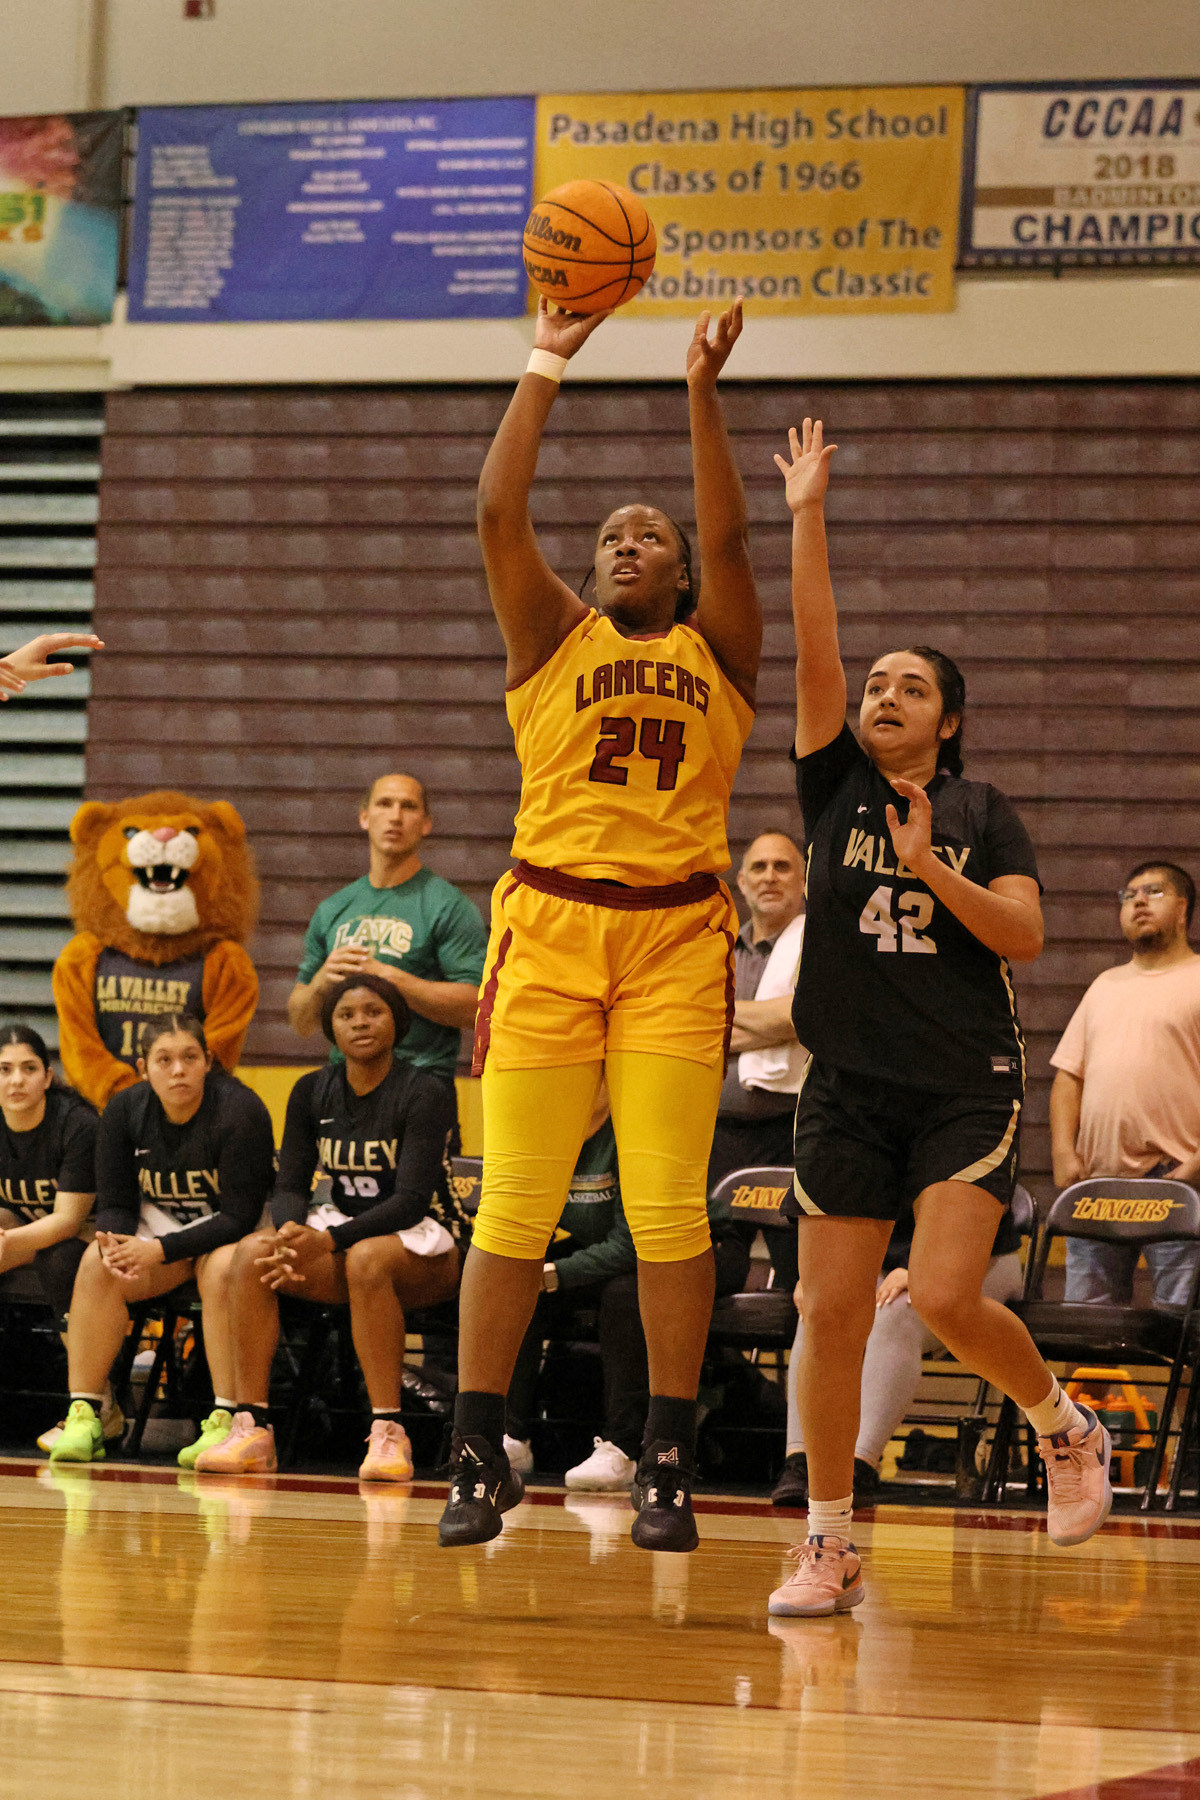 Crystal Smith made two key 3-pointers in the playoff win (photo by Richard Quinton).